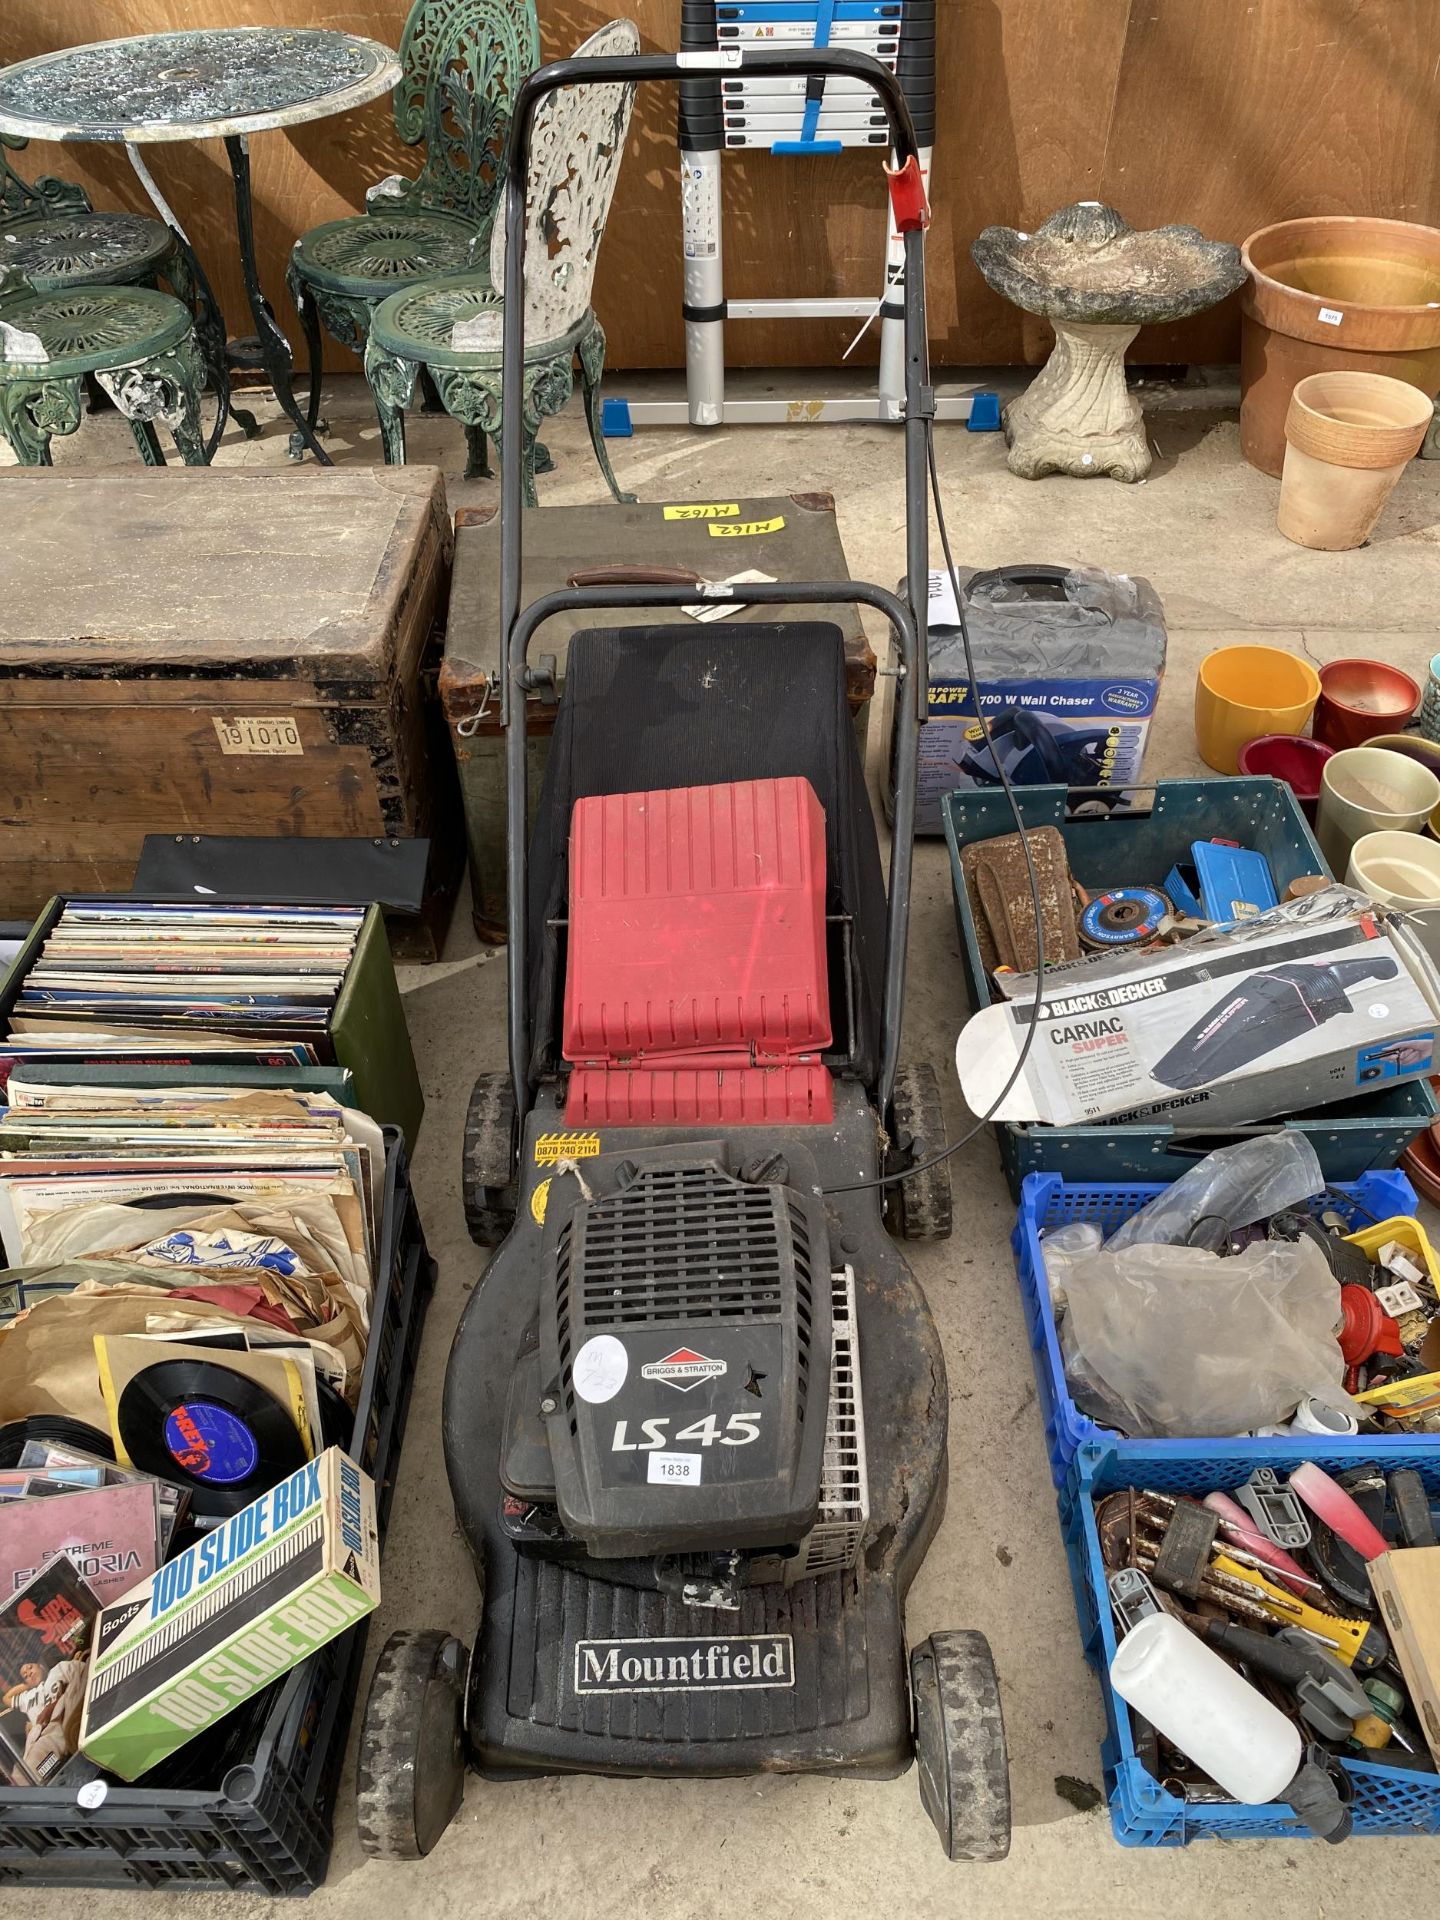 A MOUNTFIELD LAWN MOWER WITH BRIGGS AND STRATTON PETROL ENGINE